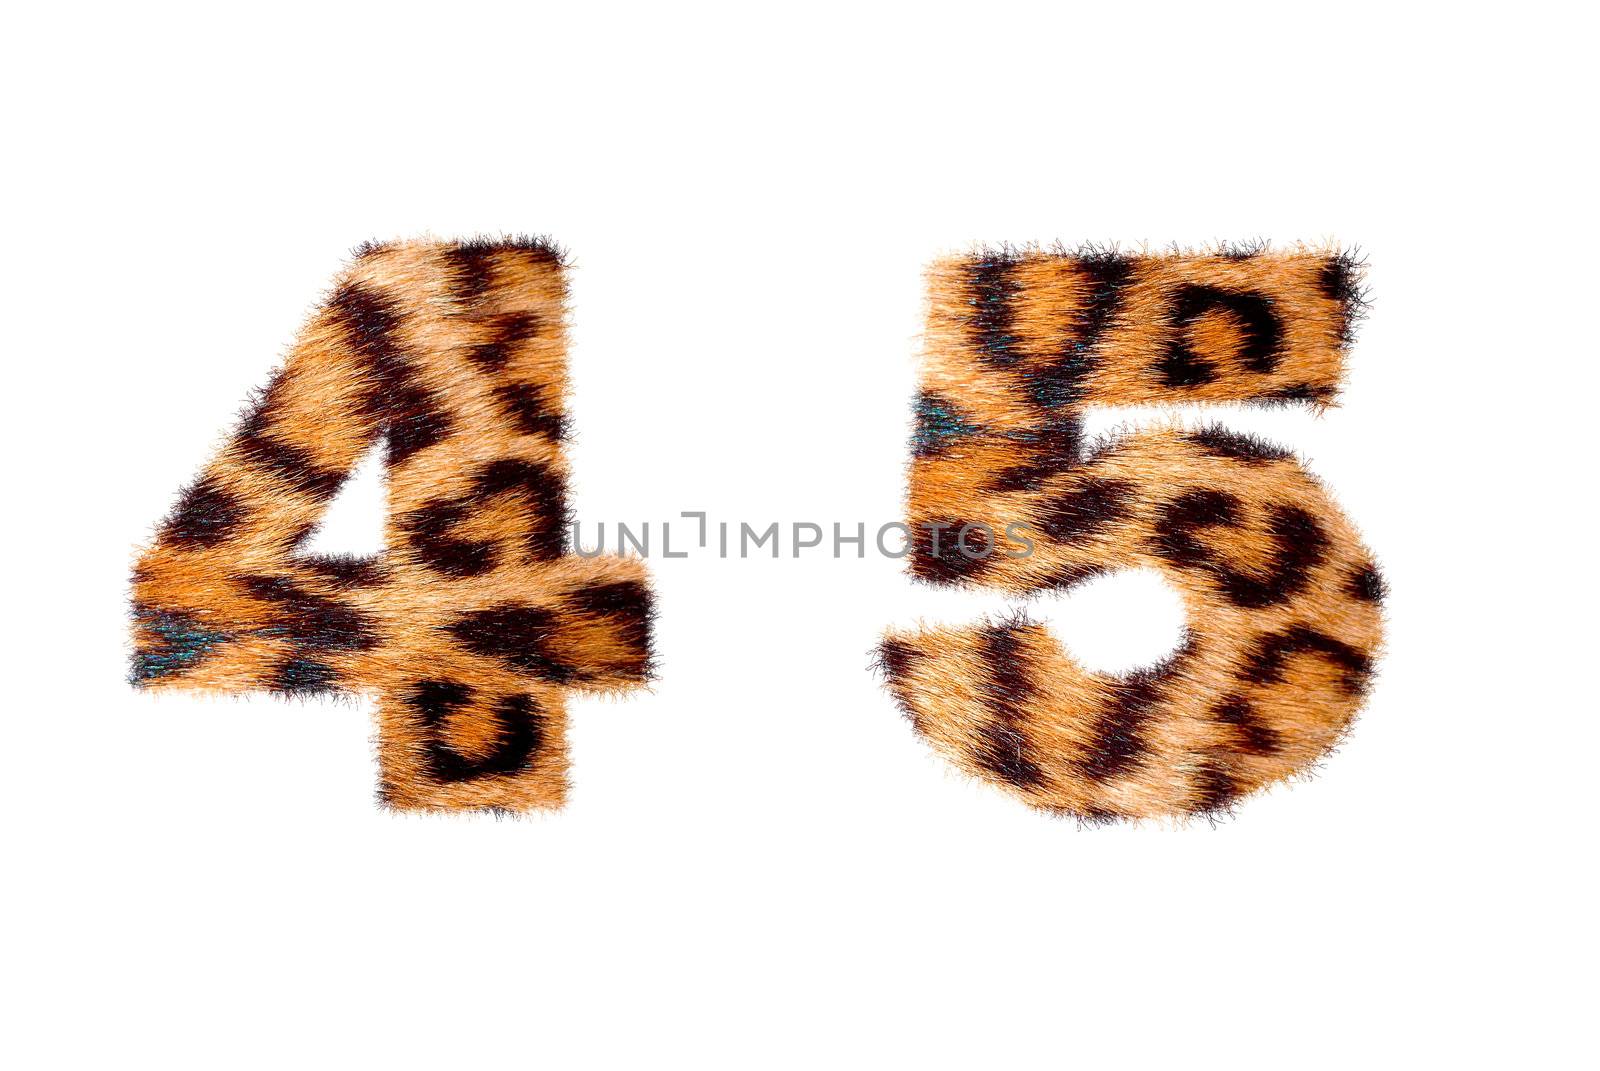 Custom number symbol base on leopard skin, isolated in white